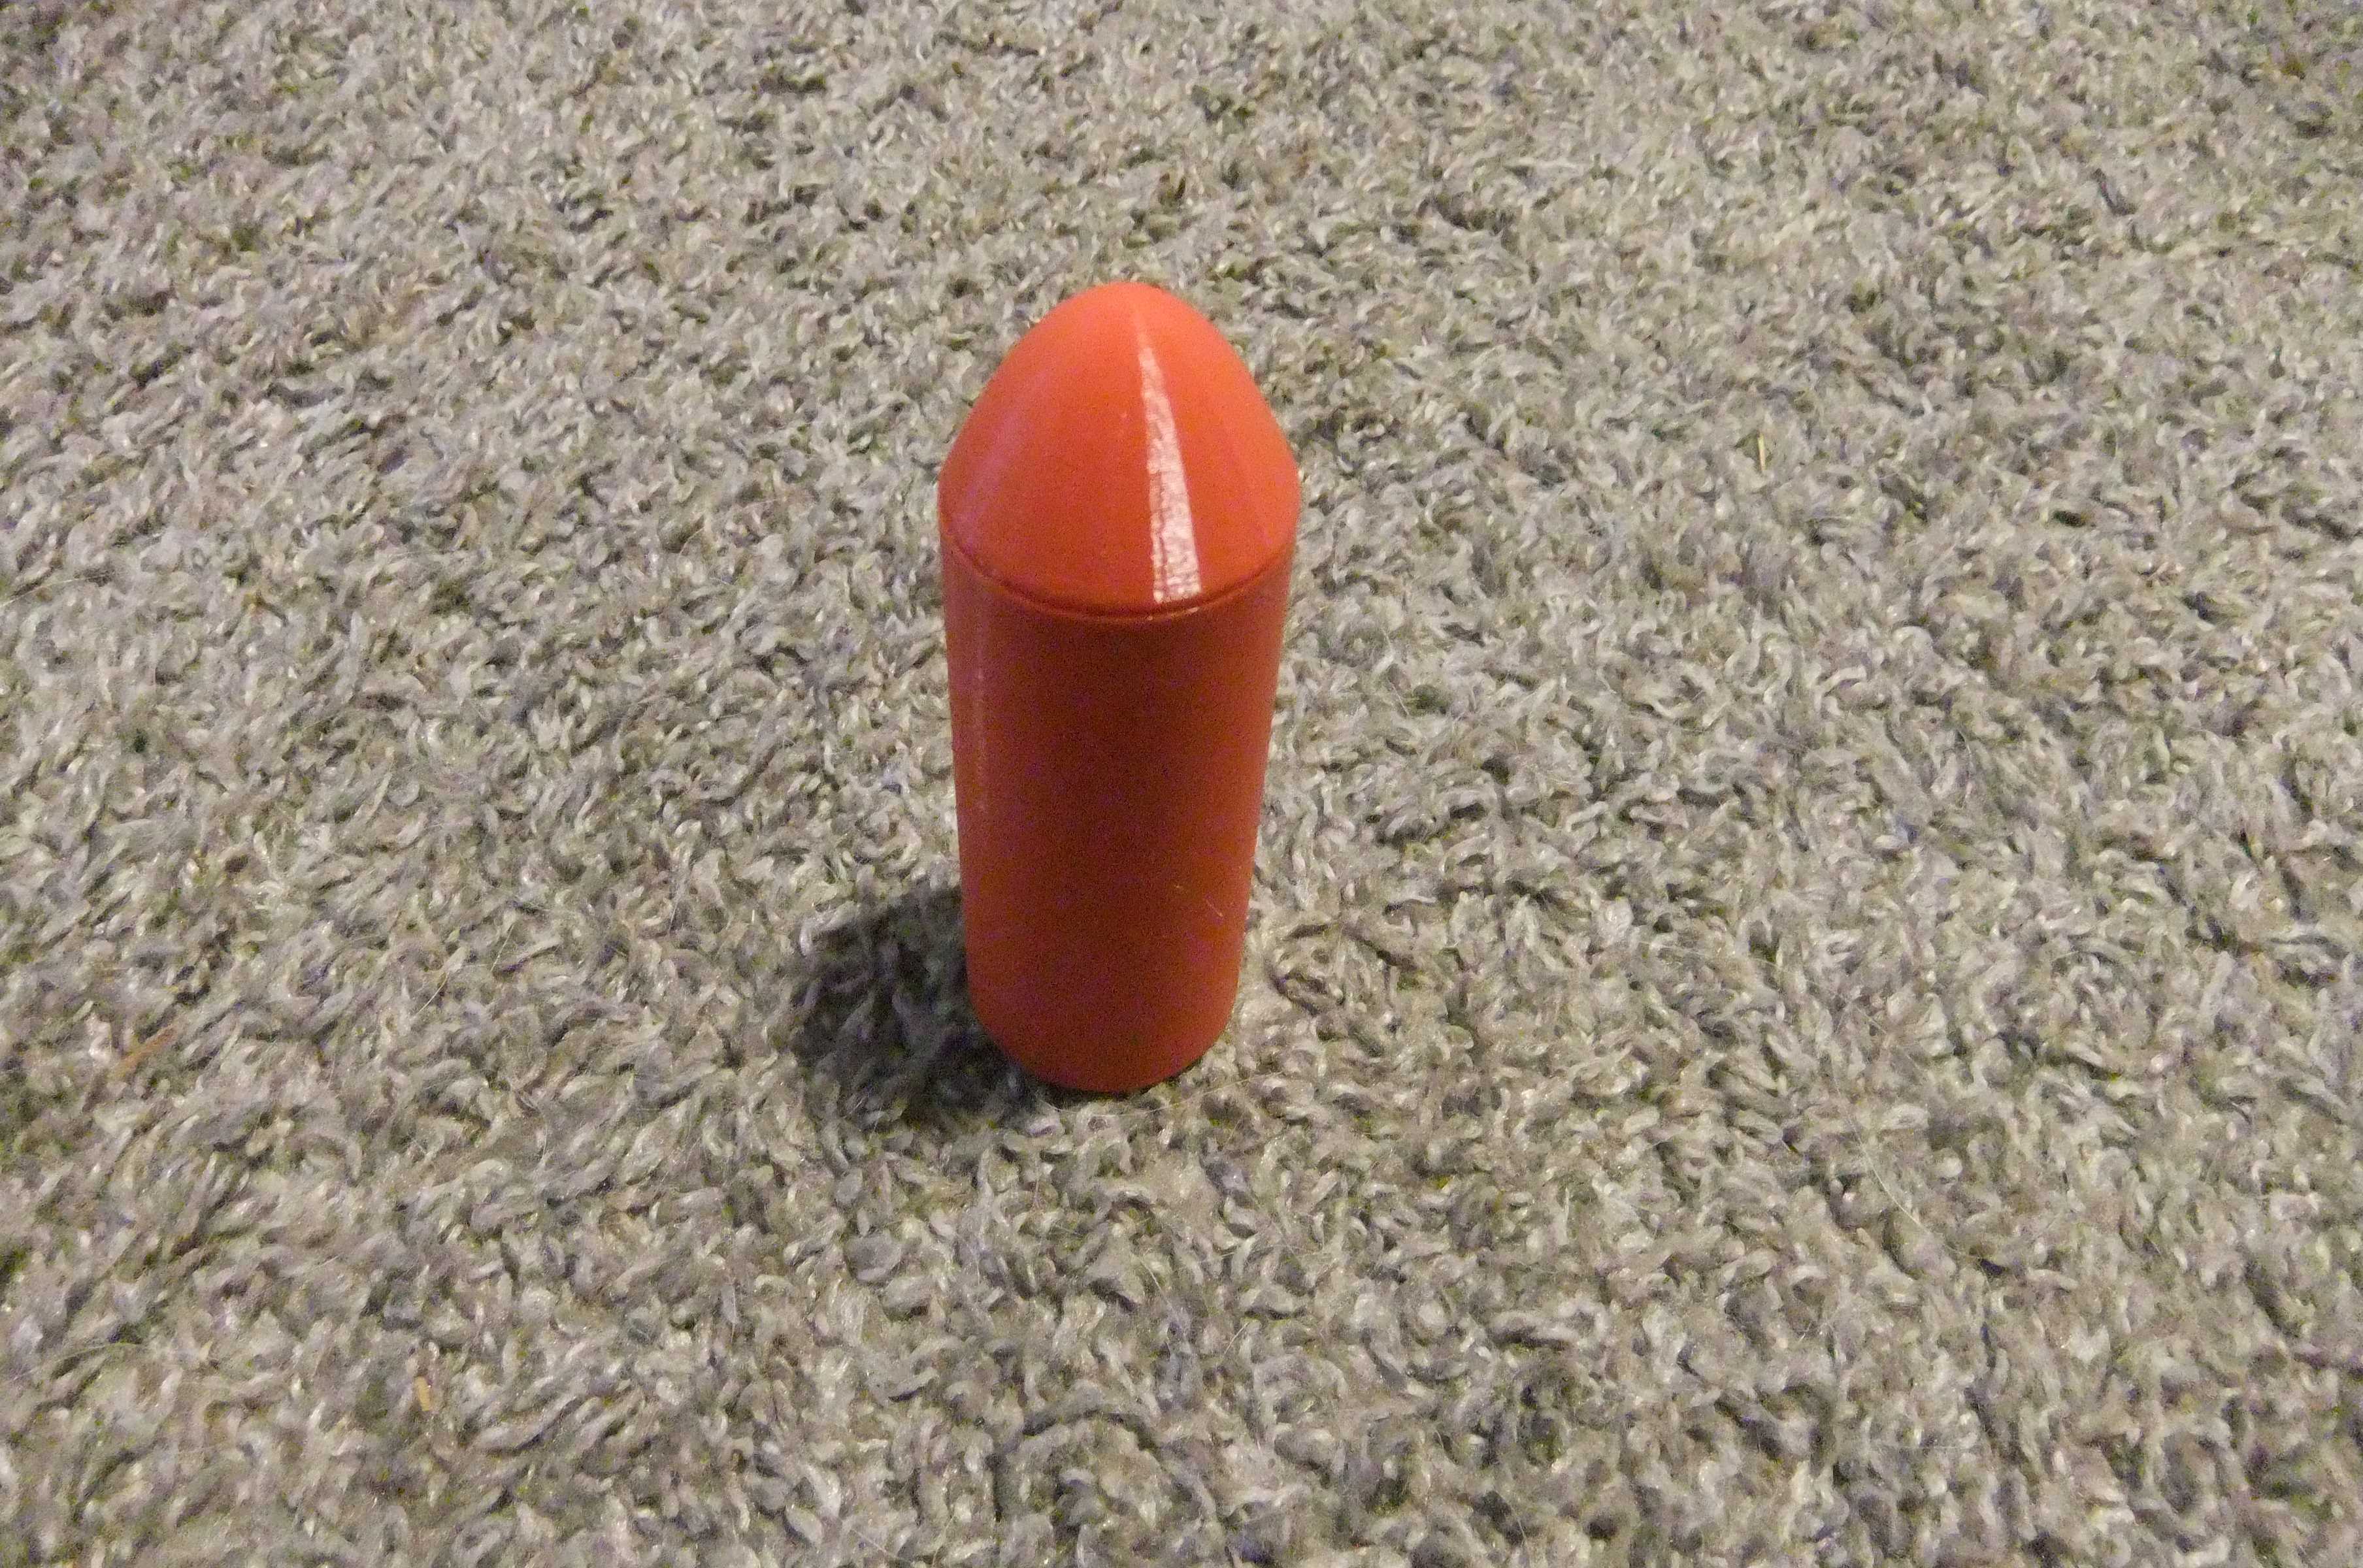 3D Printed 37mm XL Rifled Projectile Kit